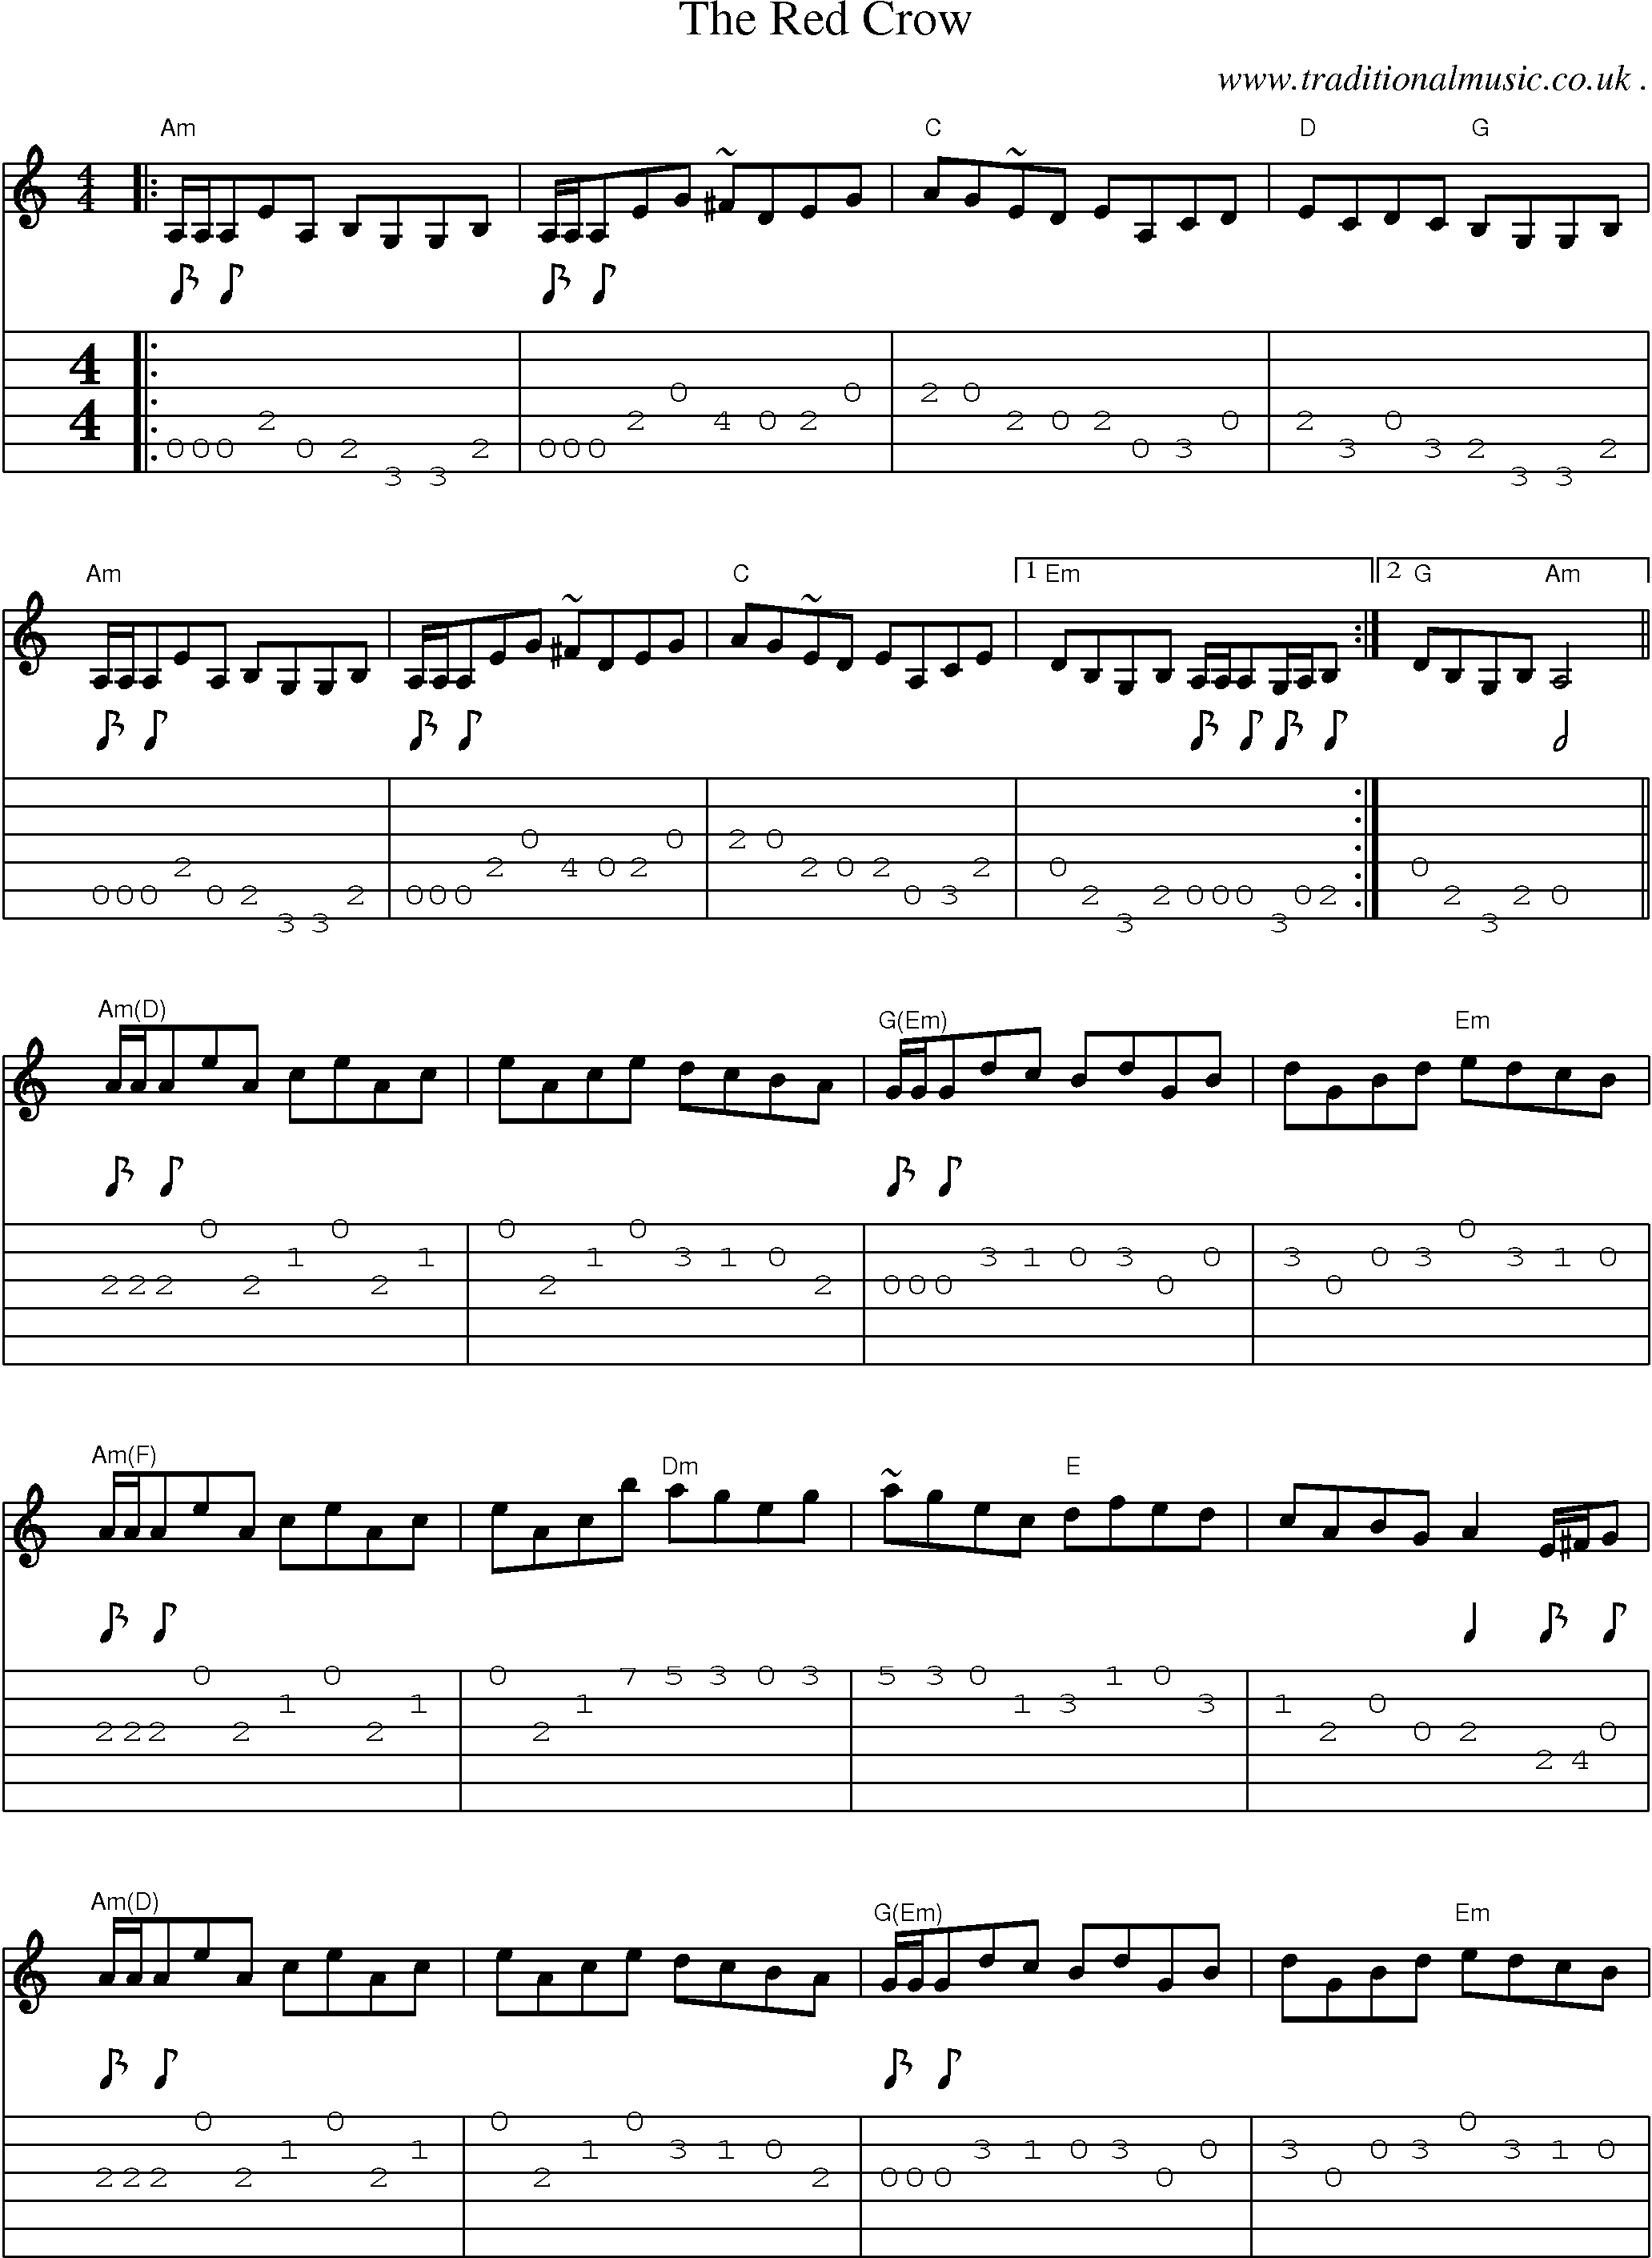 Music Score and Guitar Tabs for The Red Crow